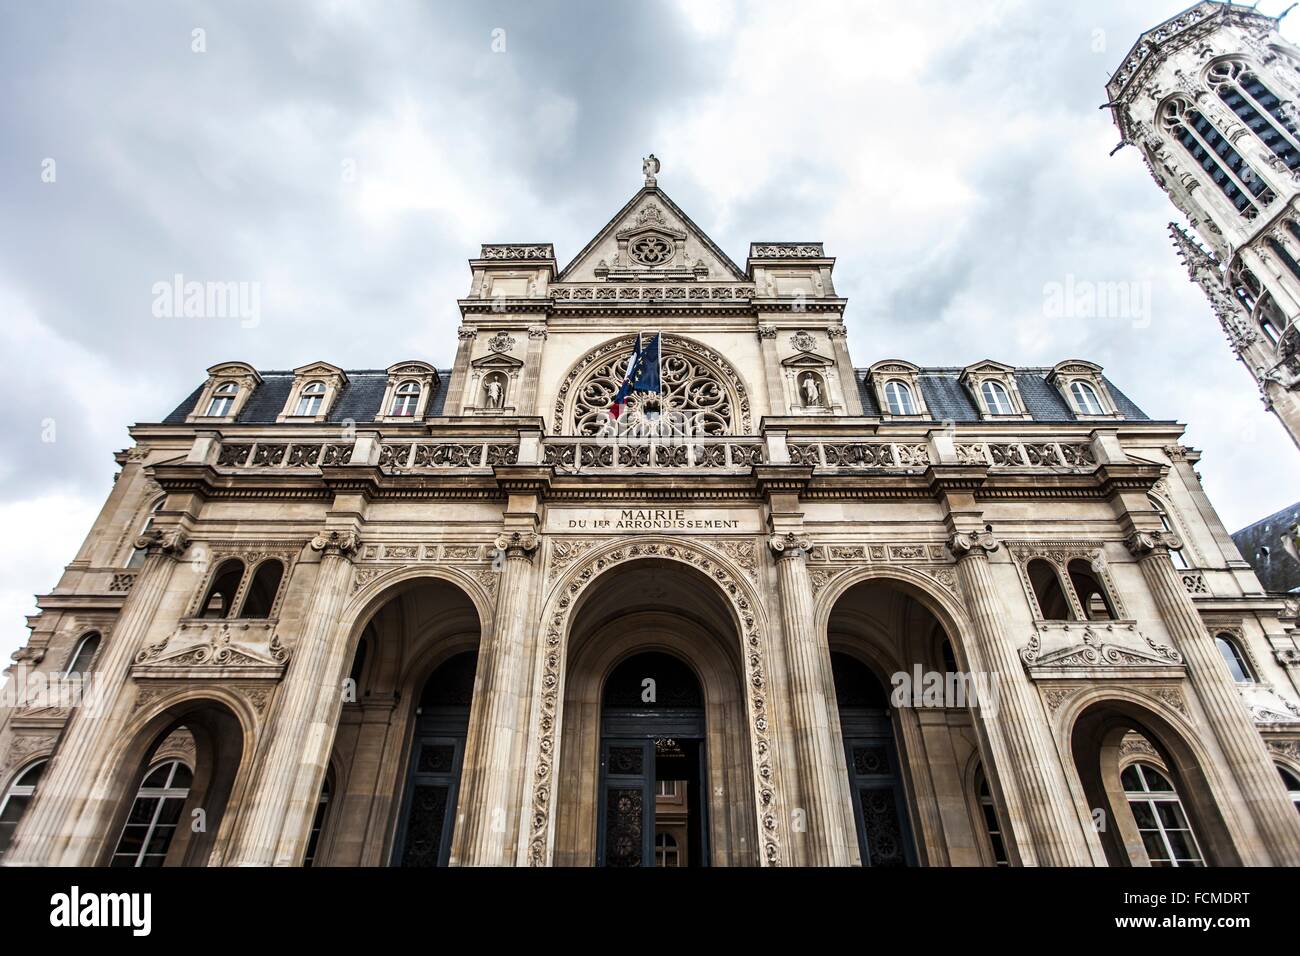 Mairie De Paris High Resolution Stock Photography And Images Alamy